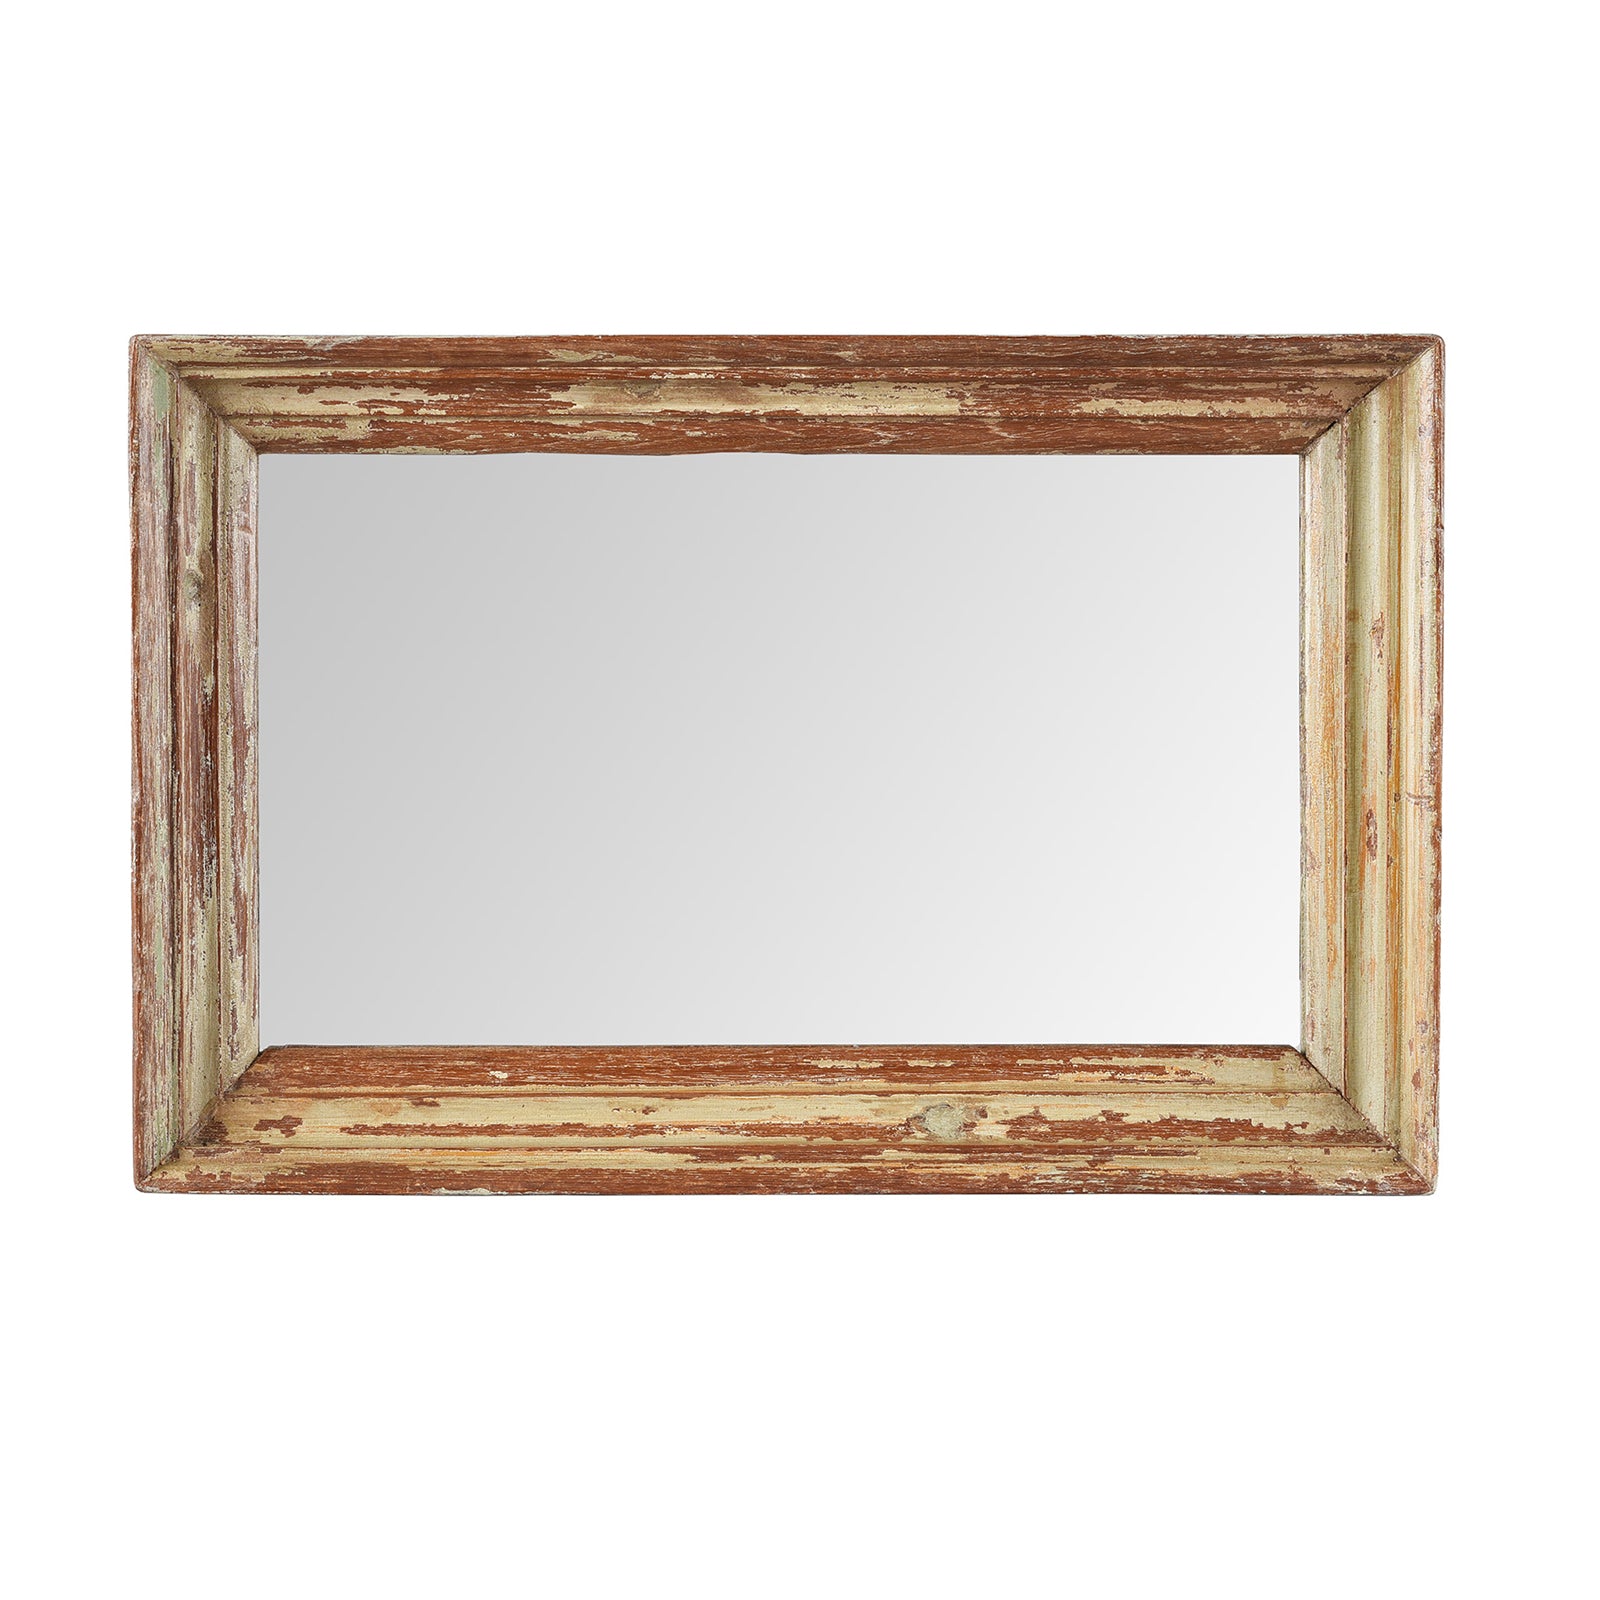 Brown / Olive Small Rustic Indian Reclaimed Wood Teak Mirror | Indigo Antiques